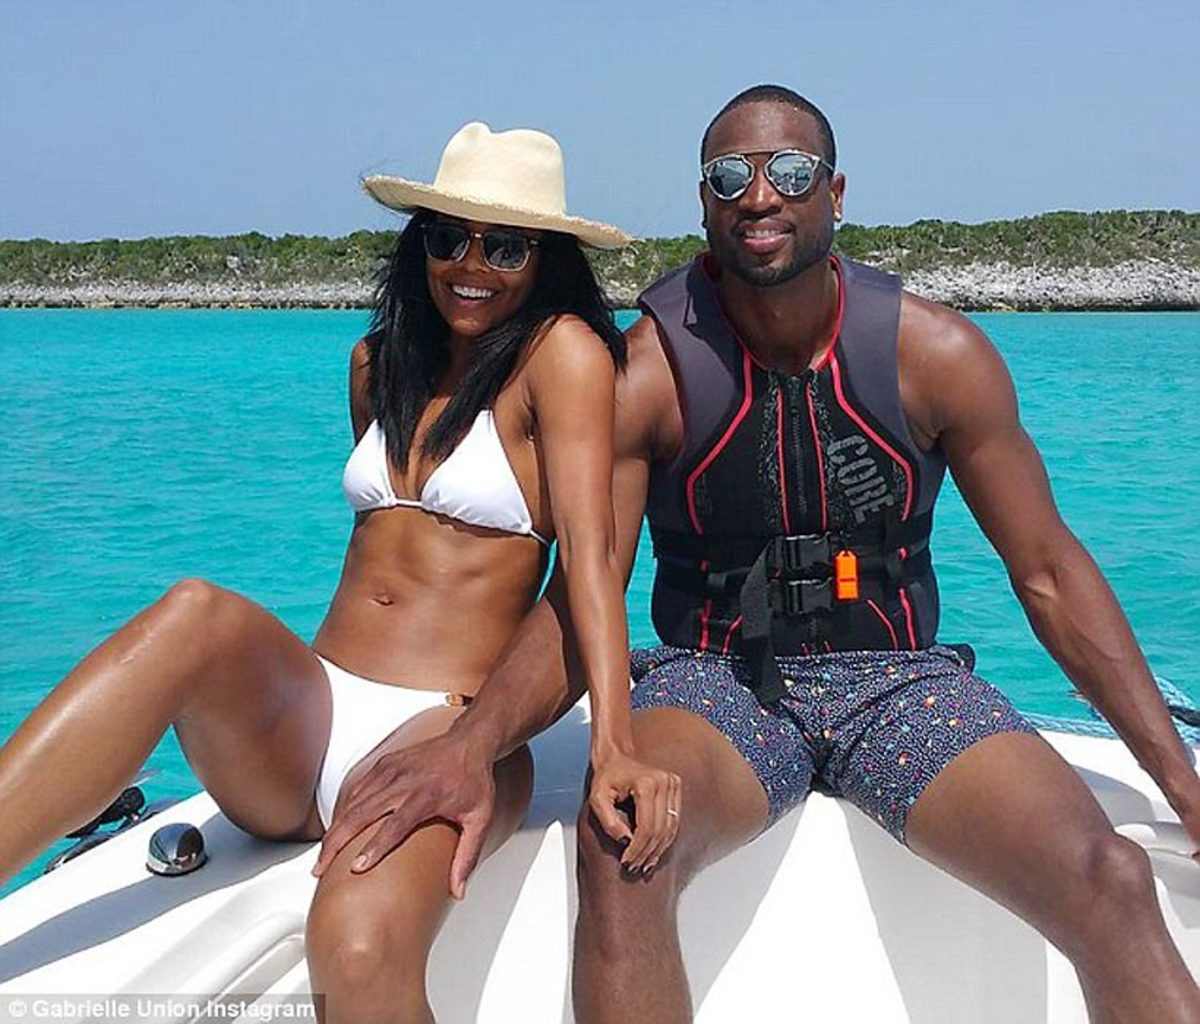 Gabrielle-Union-and-Dwayne-Wade-new.jpg